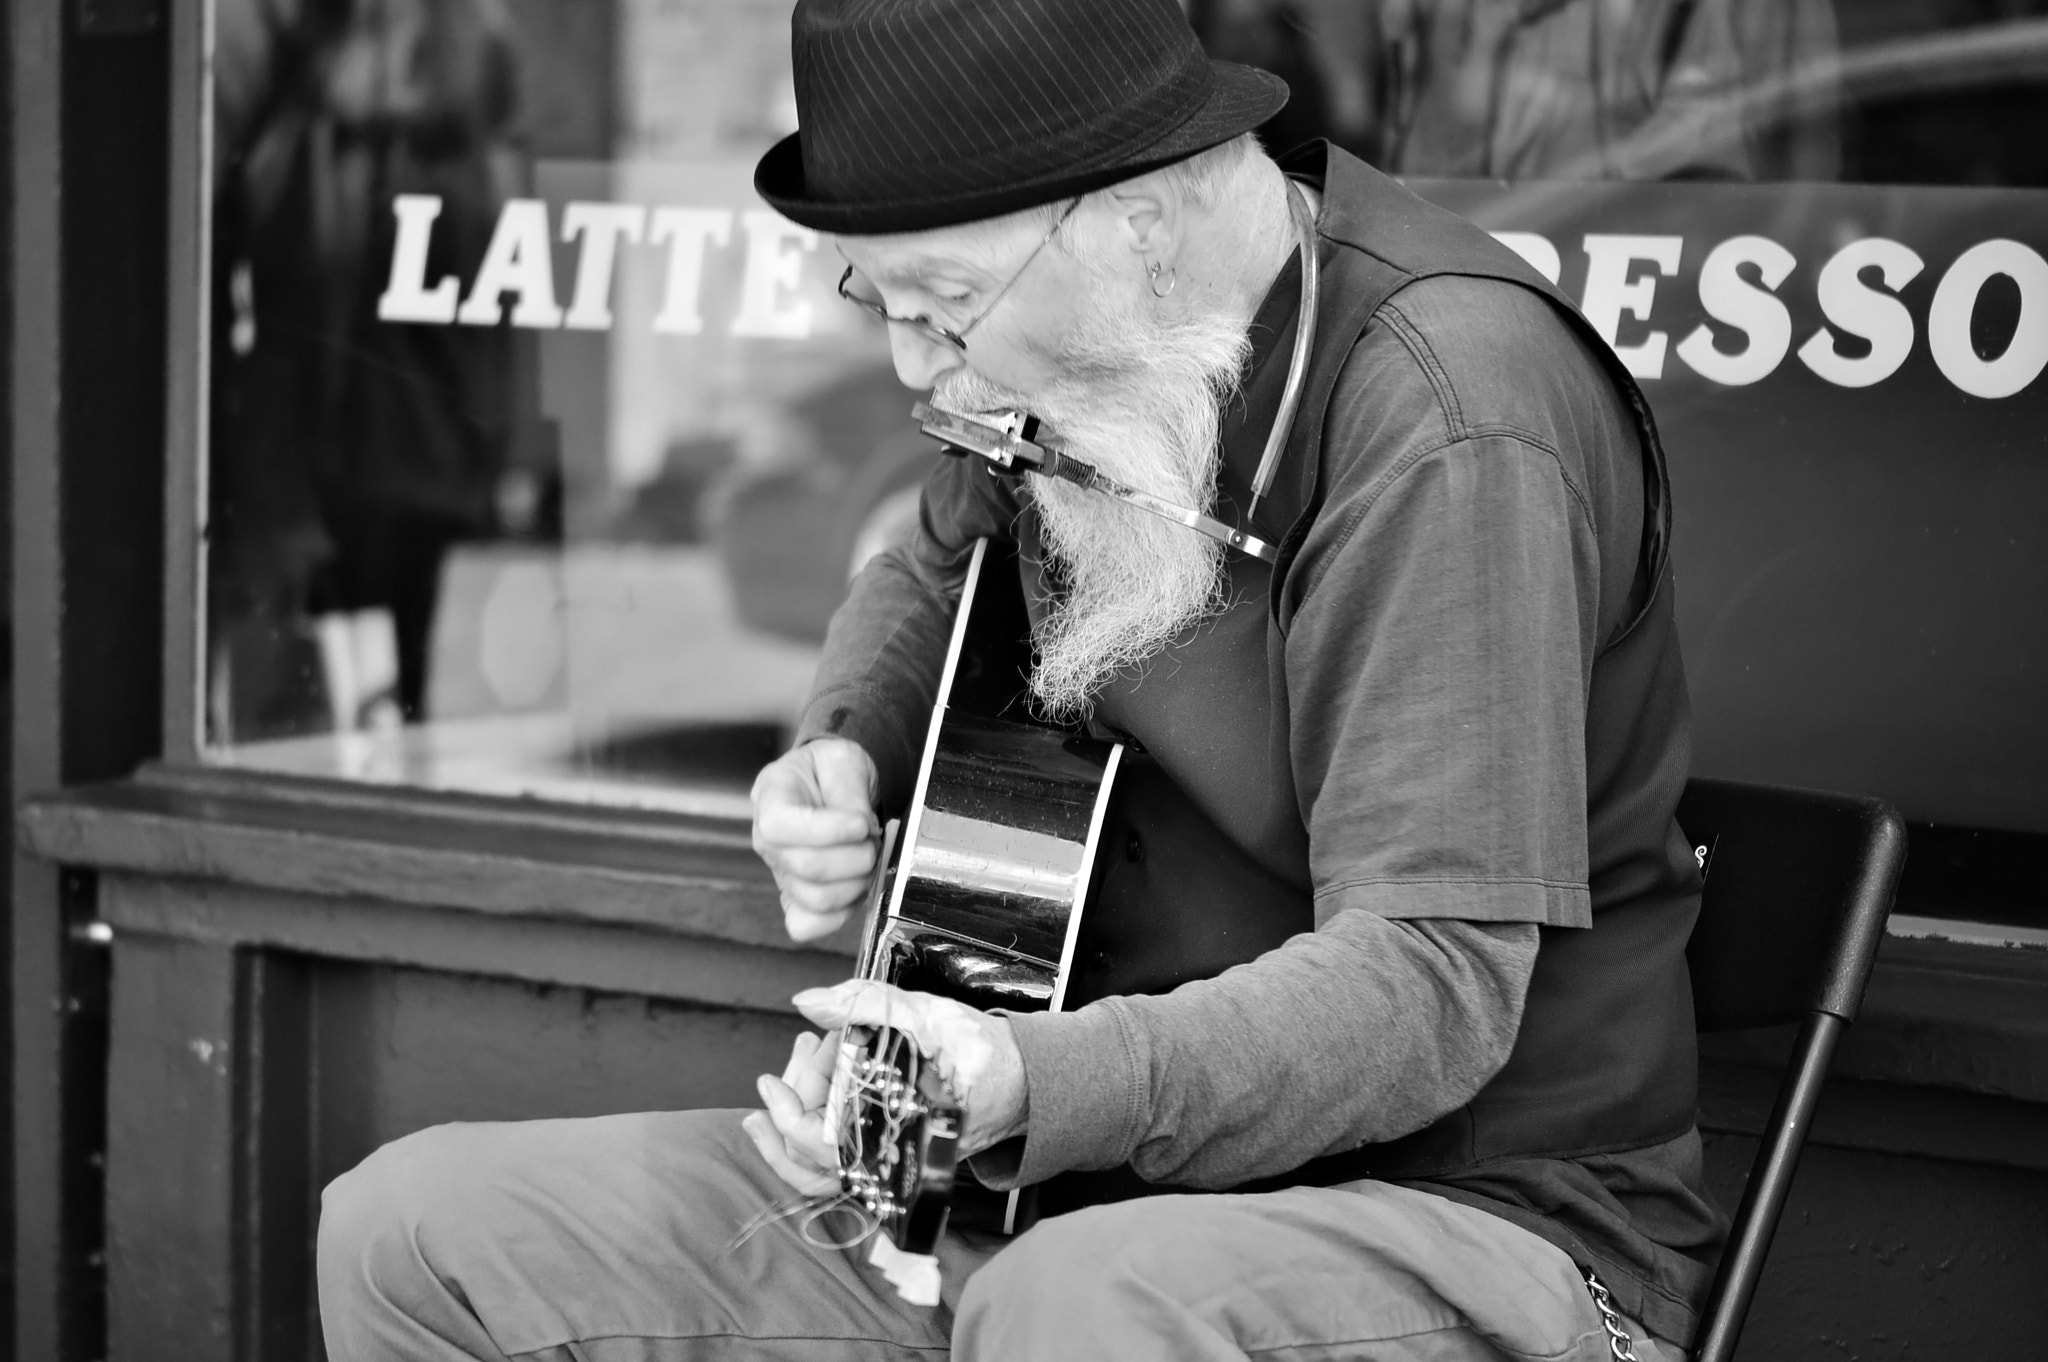 Nikon D3200 + Sigma 17-70mm F2.8-4 DC Macro OS HSM | C sample photo. Jamming in front of the first starbucks photography